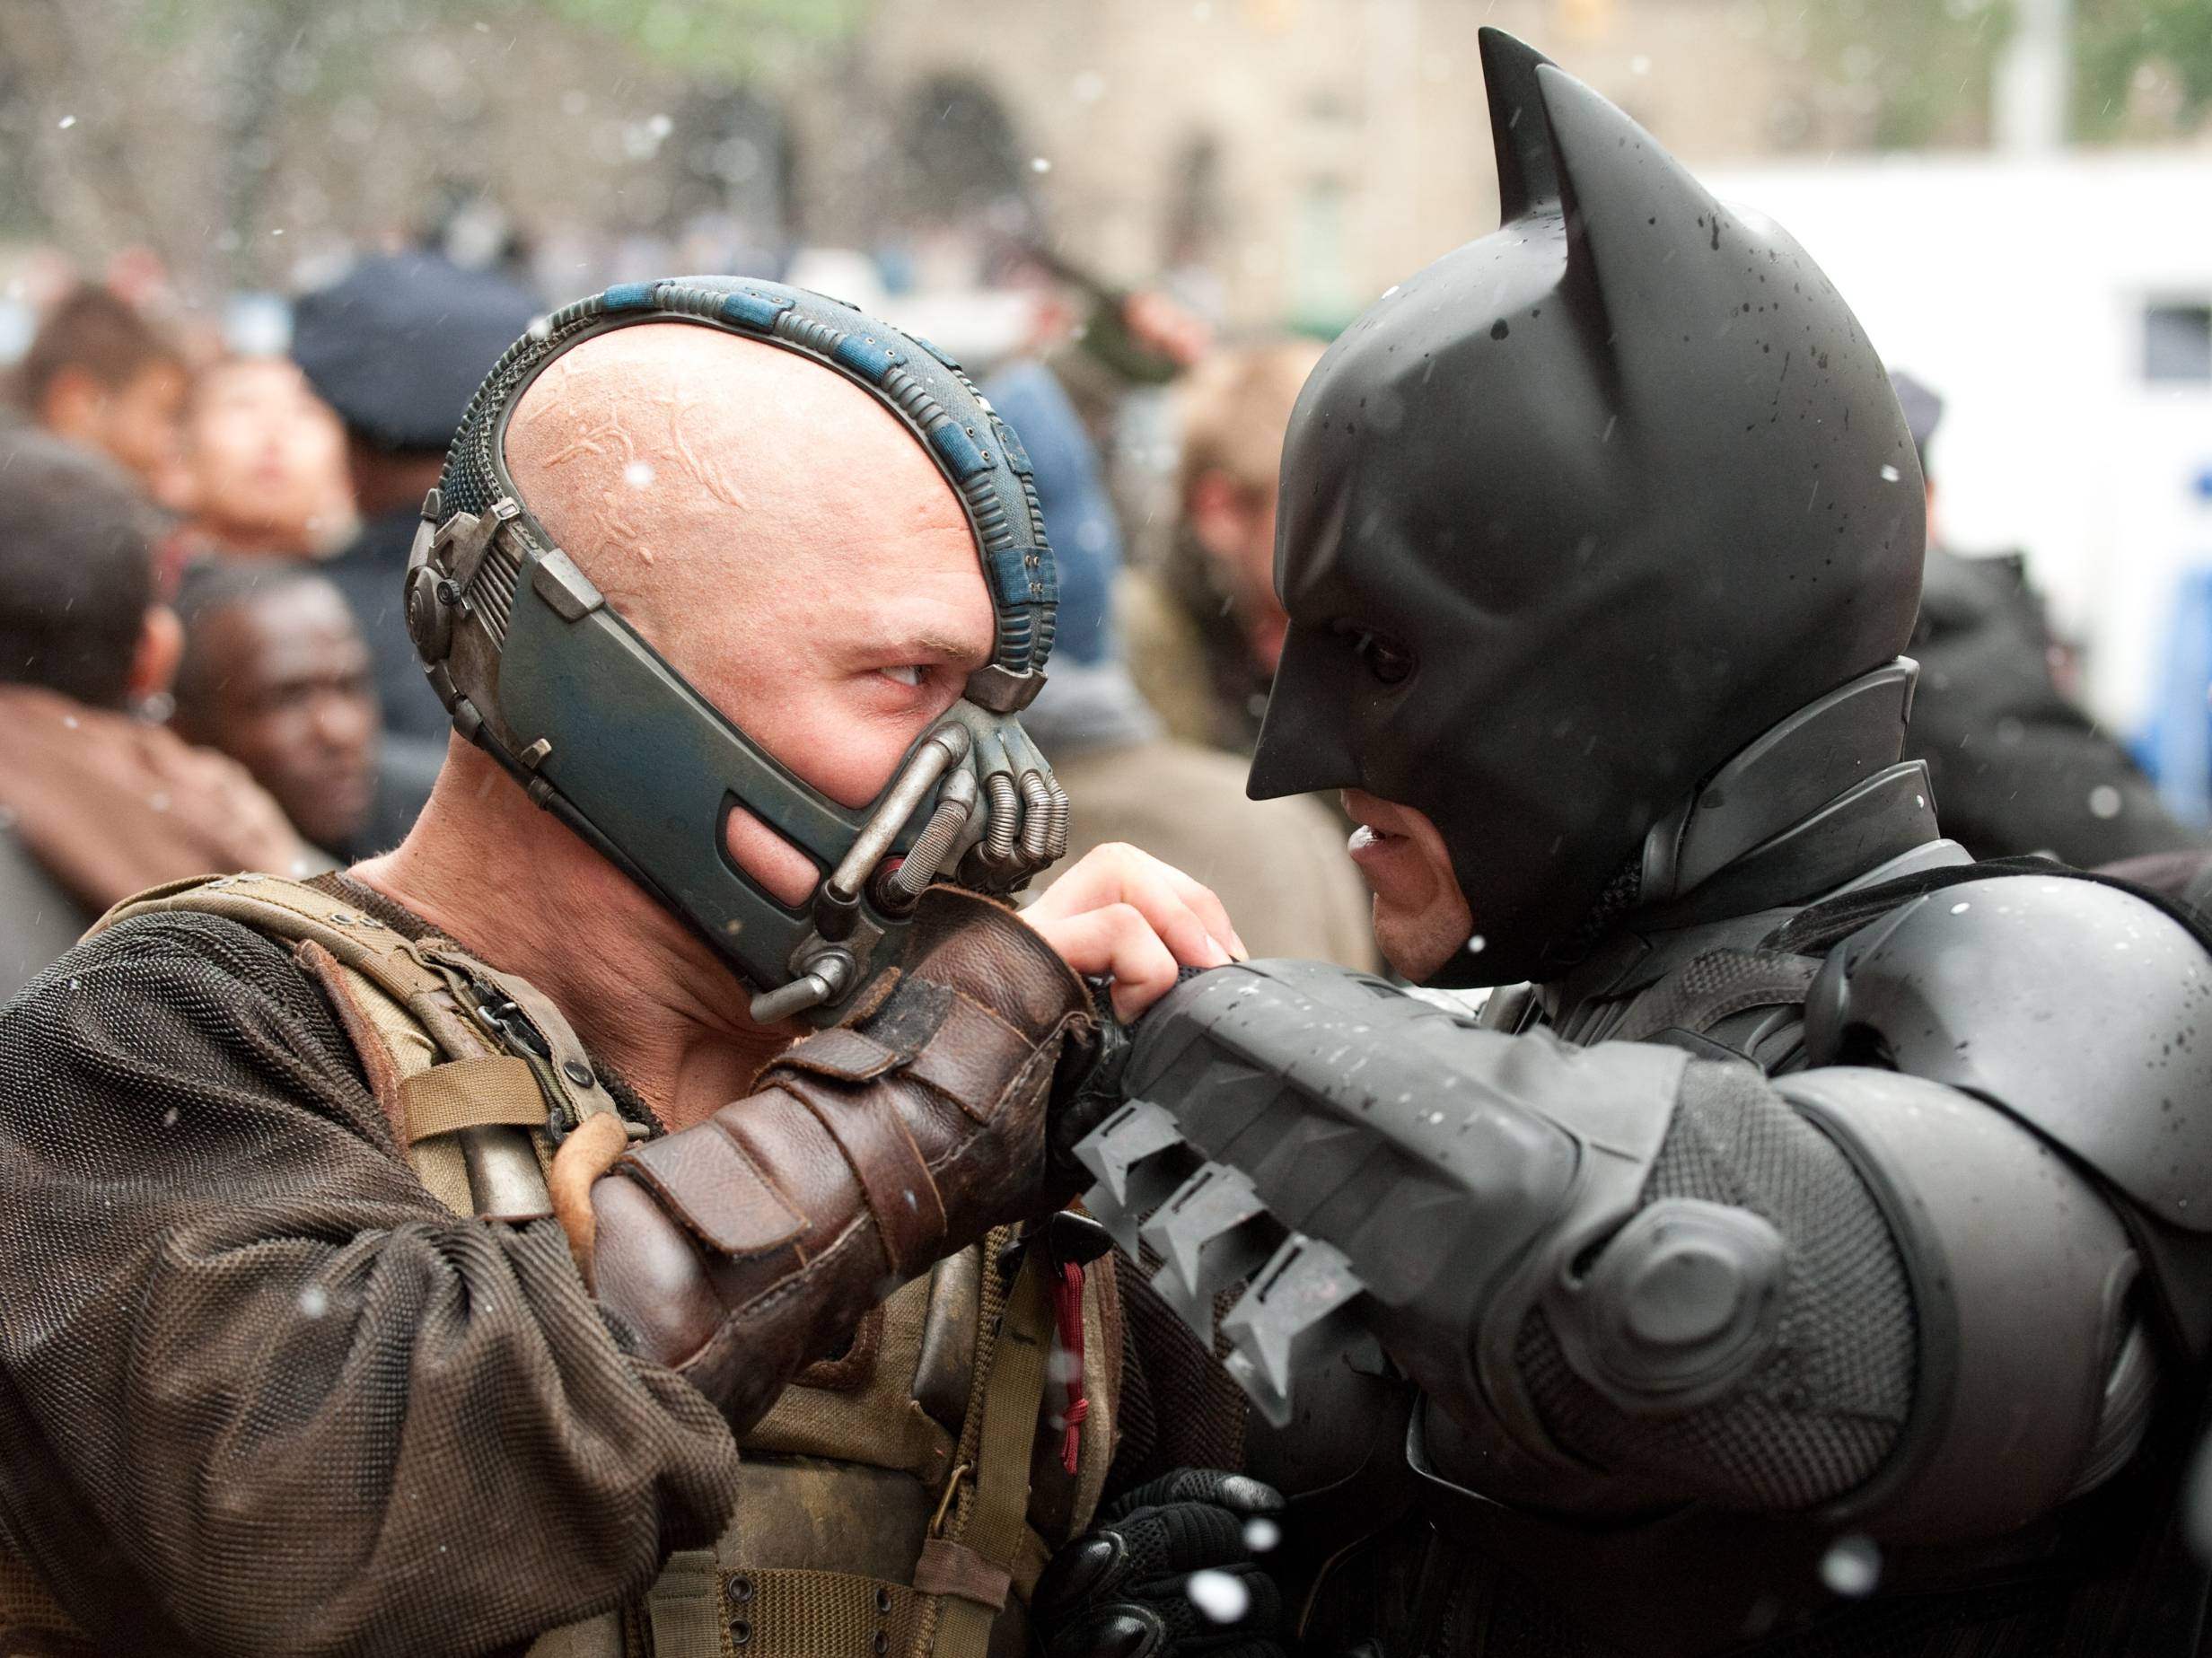 The Dark Knight Rises brings the trilogy to a satisfying end